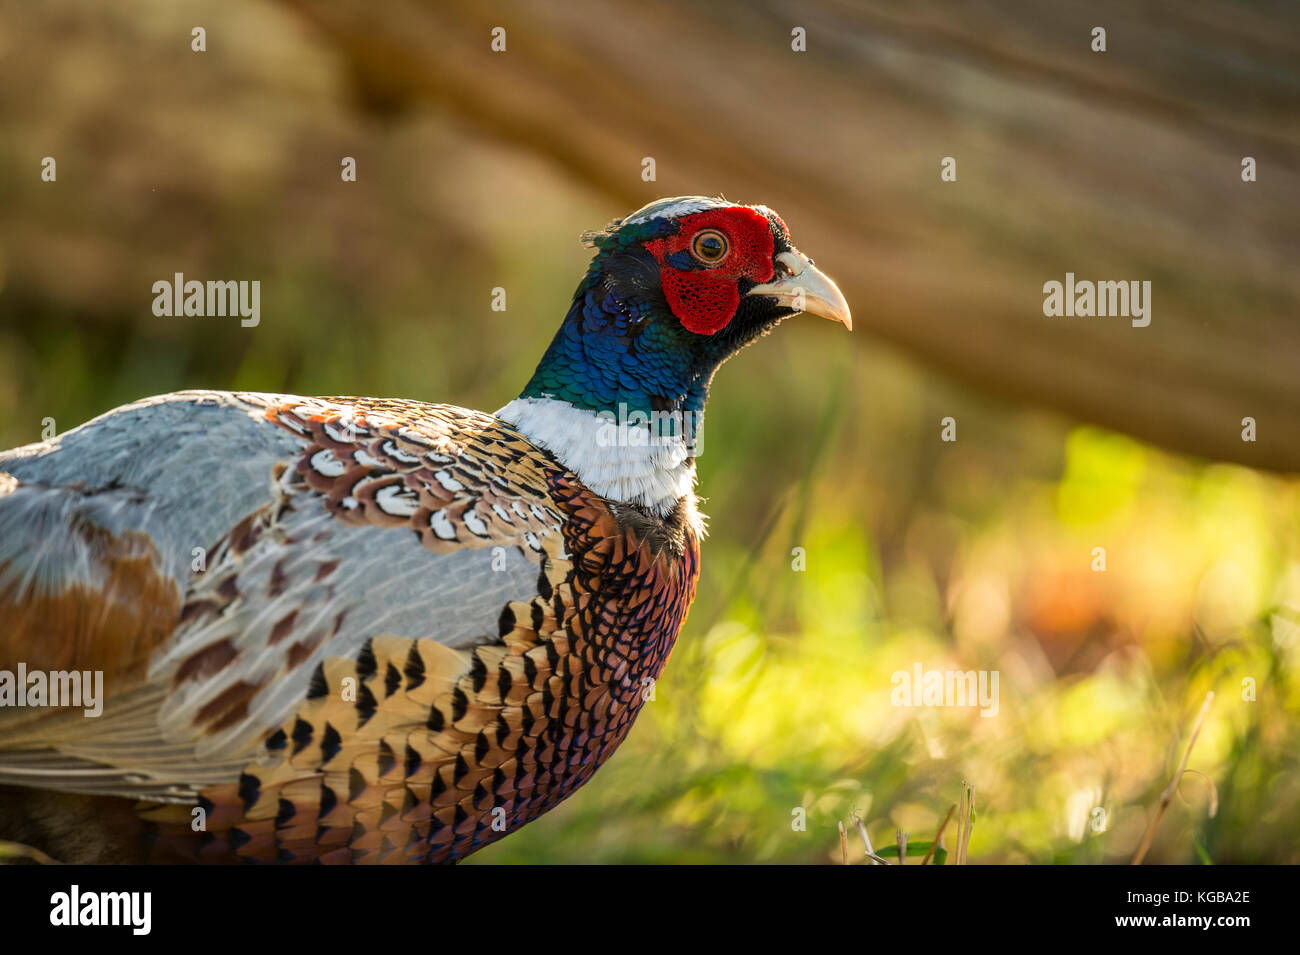 British Wildlife in Natural Habitat. Single Ring-necked Pheasant foraging in ancient woodlands on bright autumn day. Stock Photo